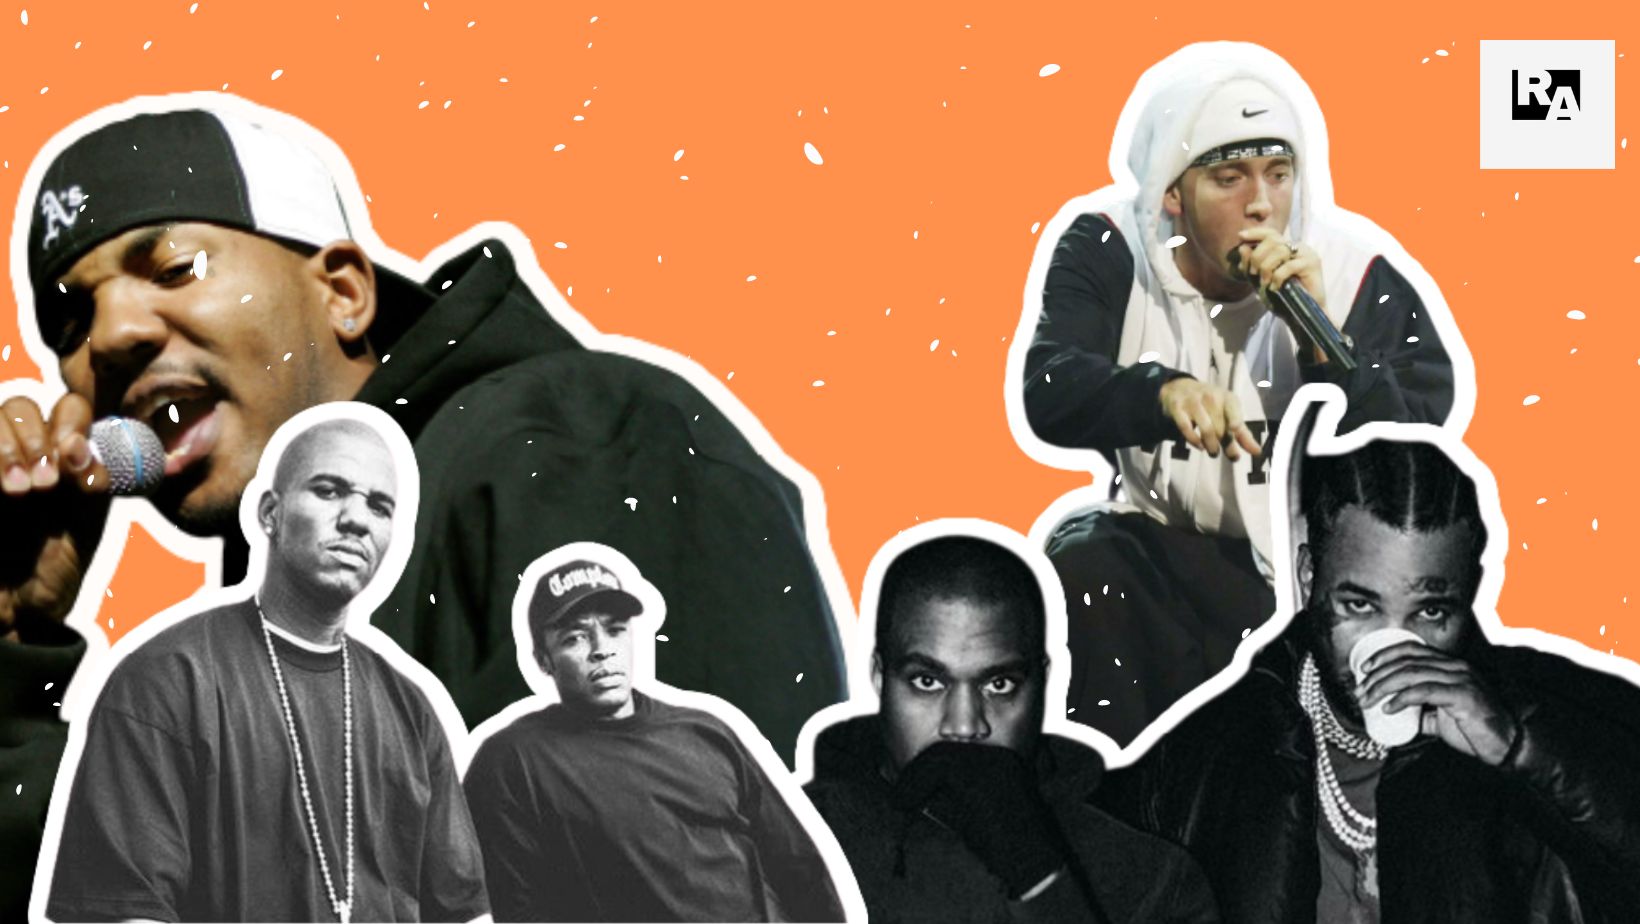 The Complete History Of The Game And Eminem’s Relationship